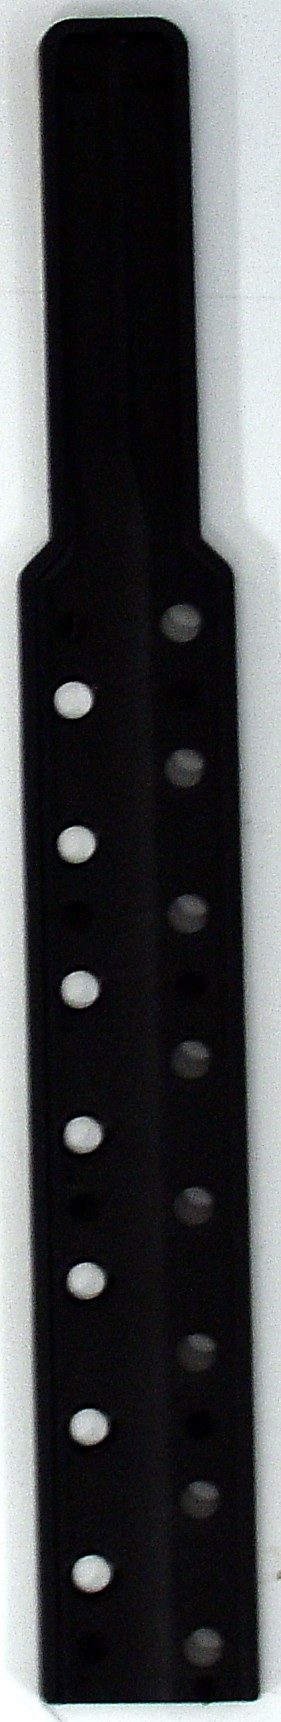 Plastic PAINT Paddle with Holes